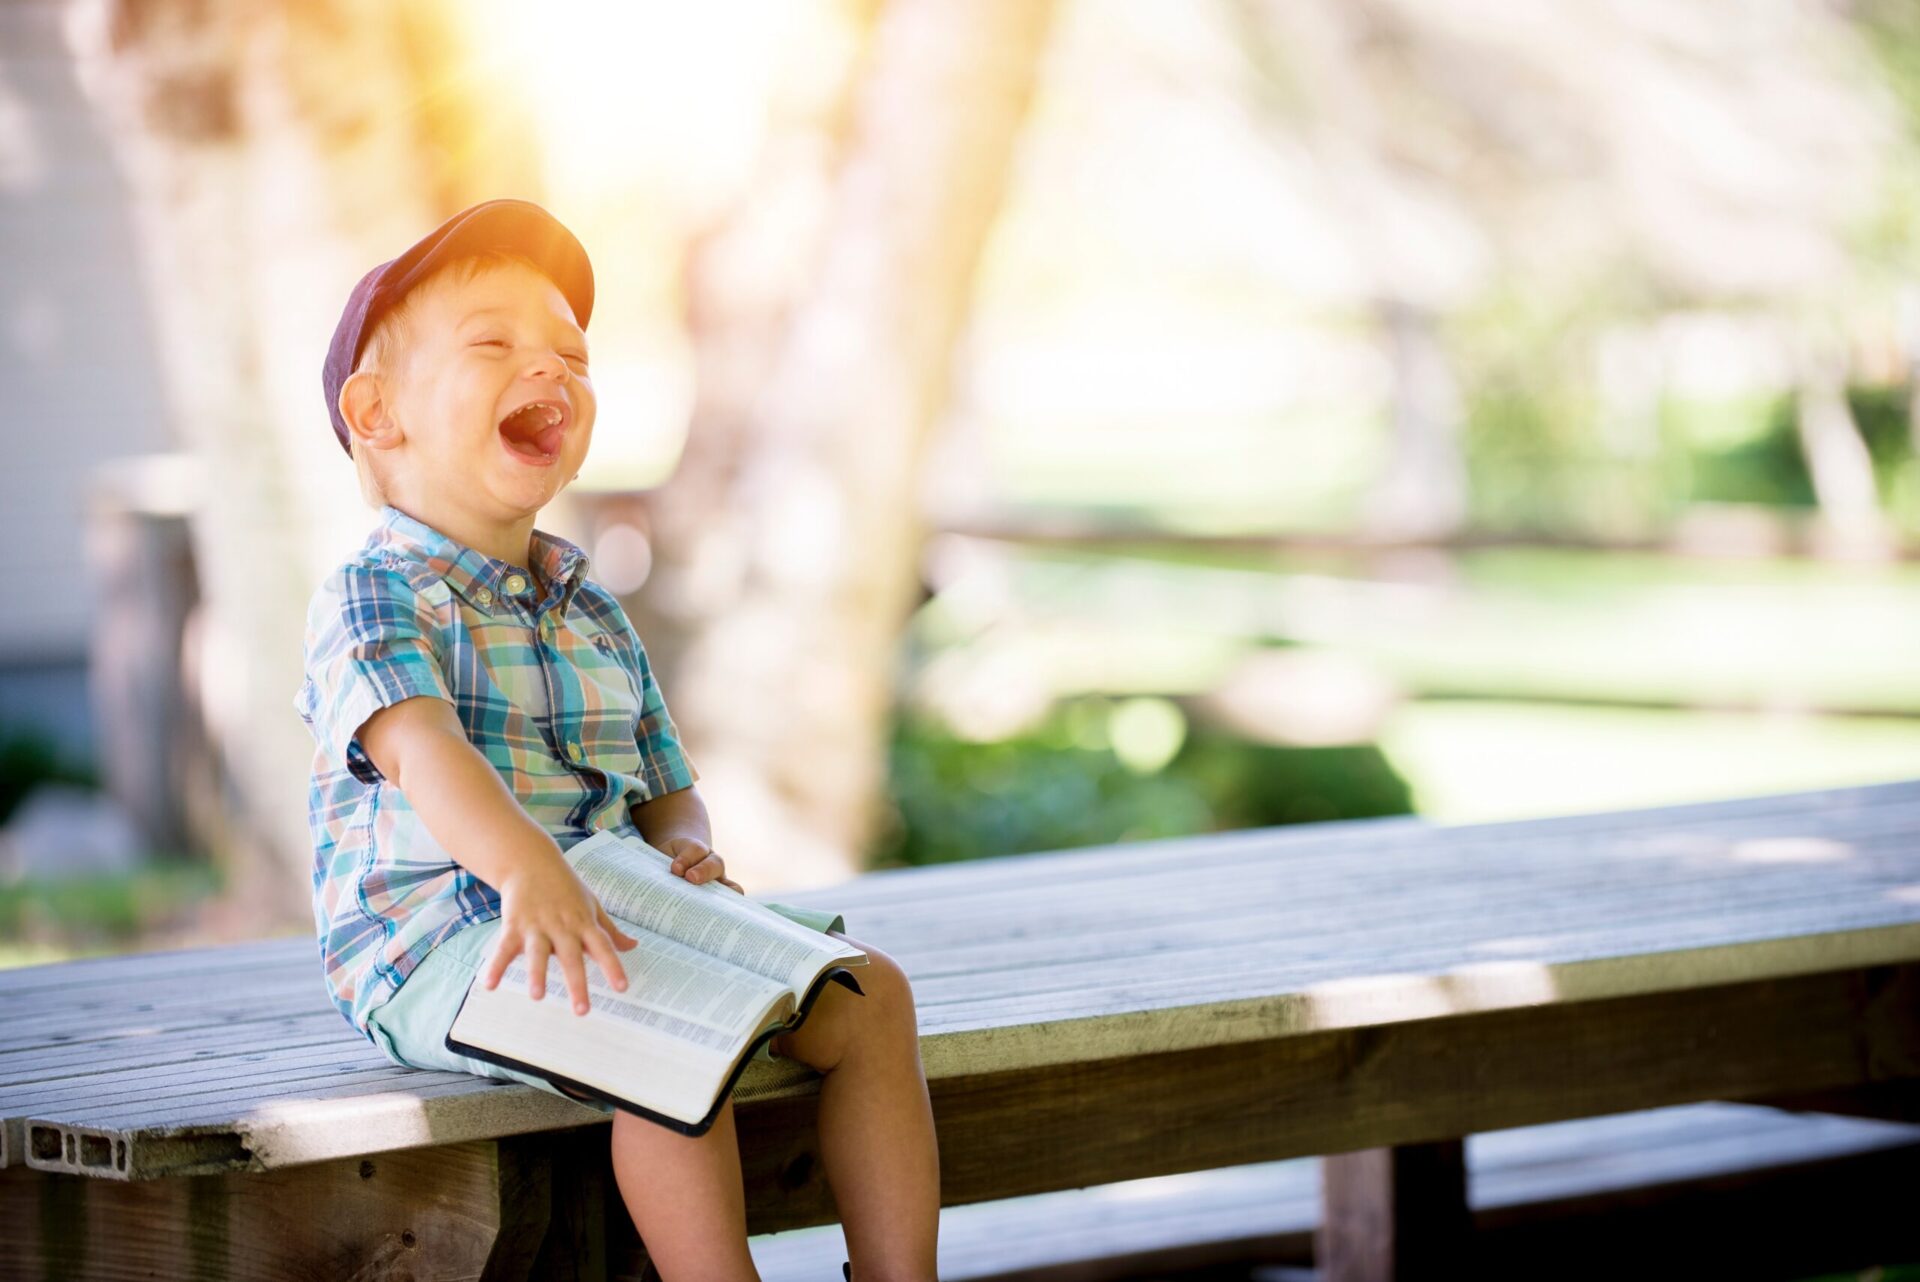 A laughing young boy sits on an outdoor bench with an open book in his hand.